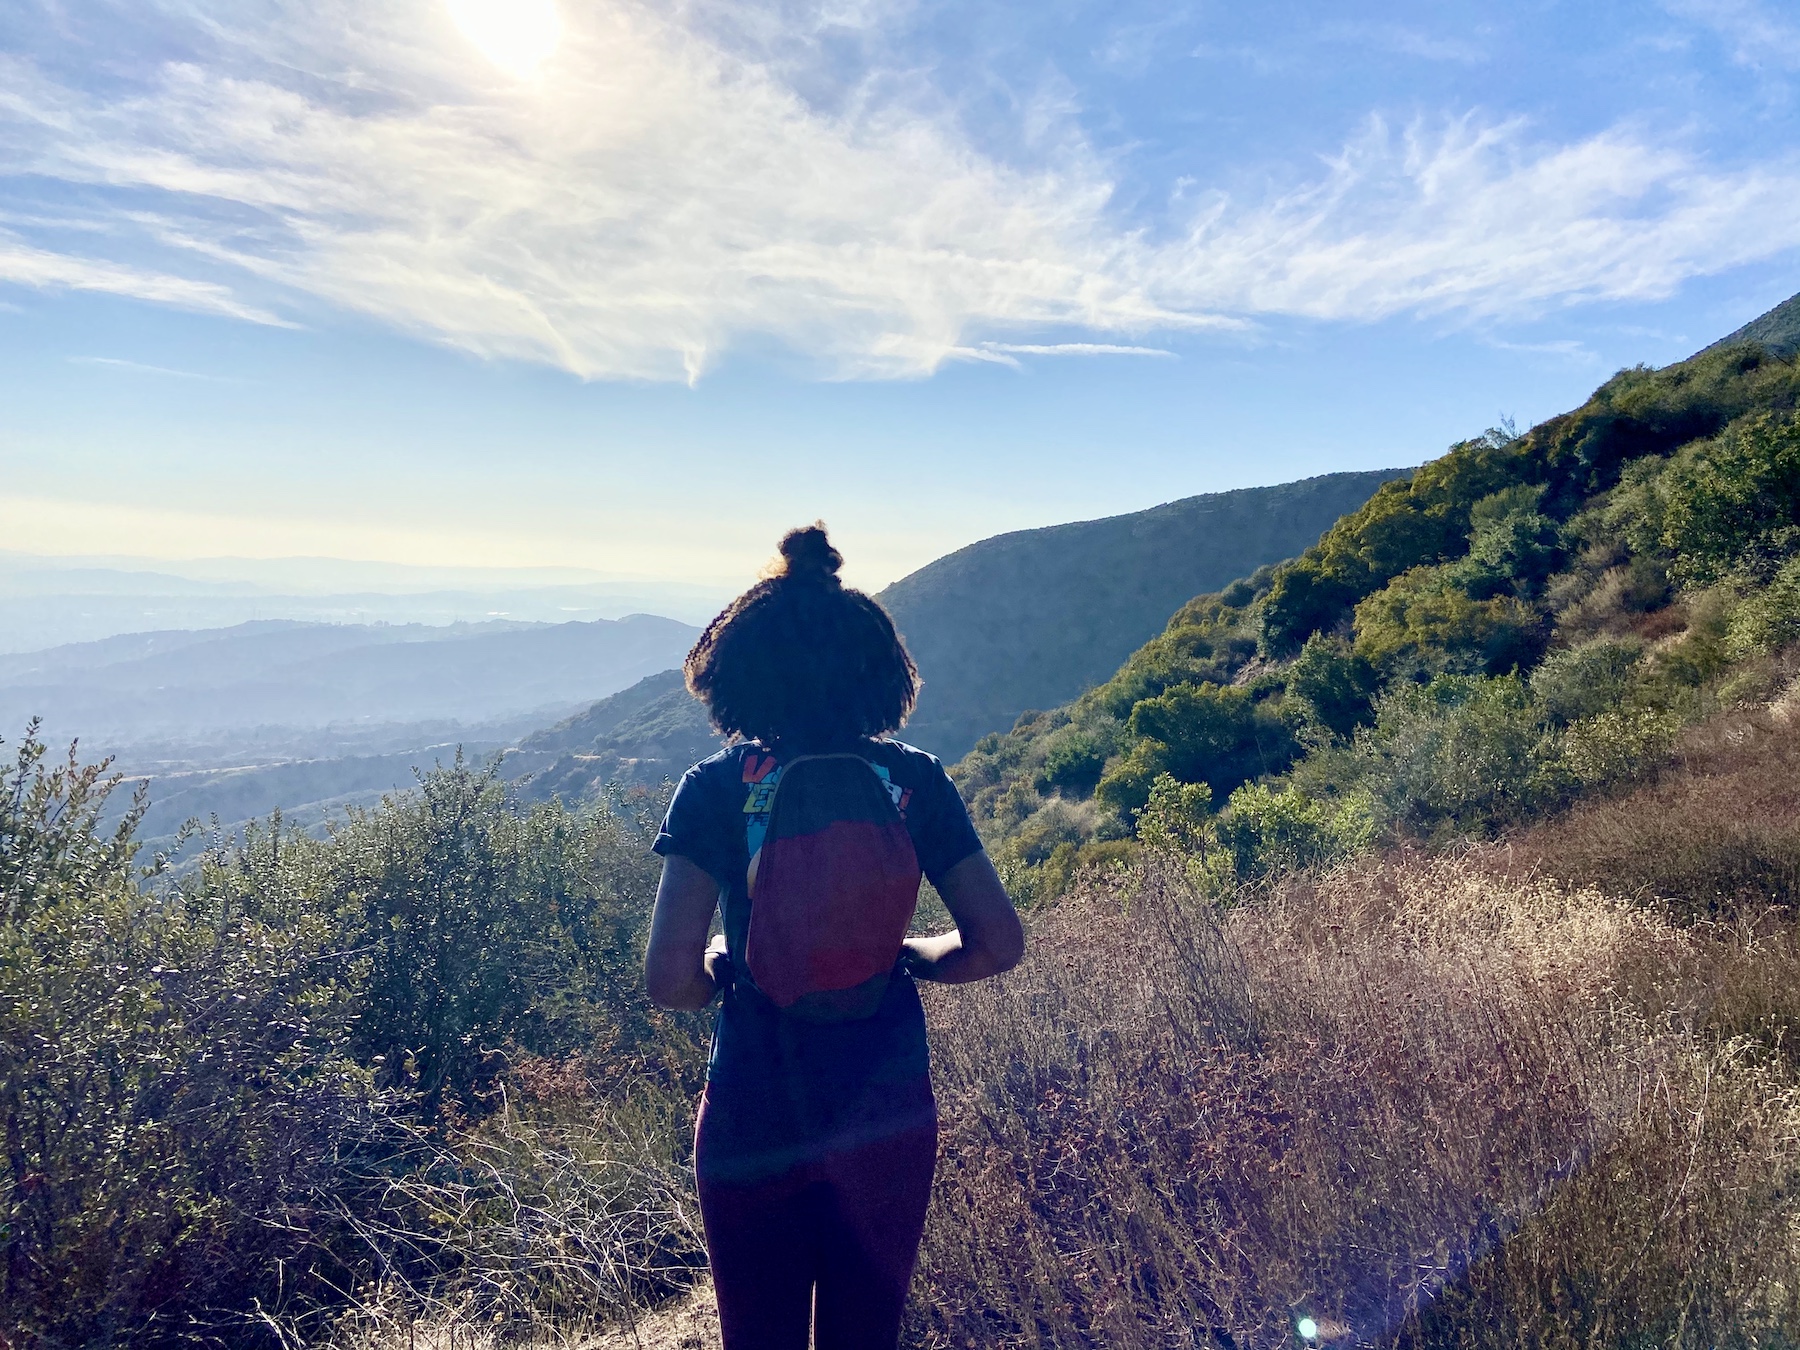 Think You're An Expert In Quotes About Hiking? Read These. - Wellness  Travel Diaries